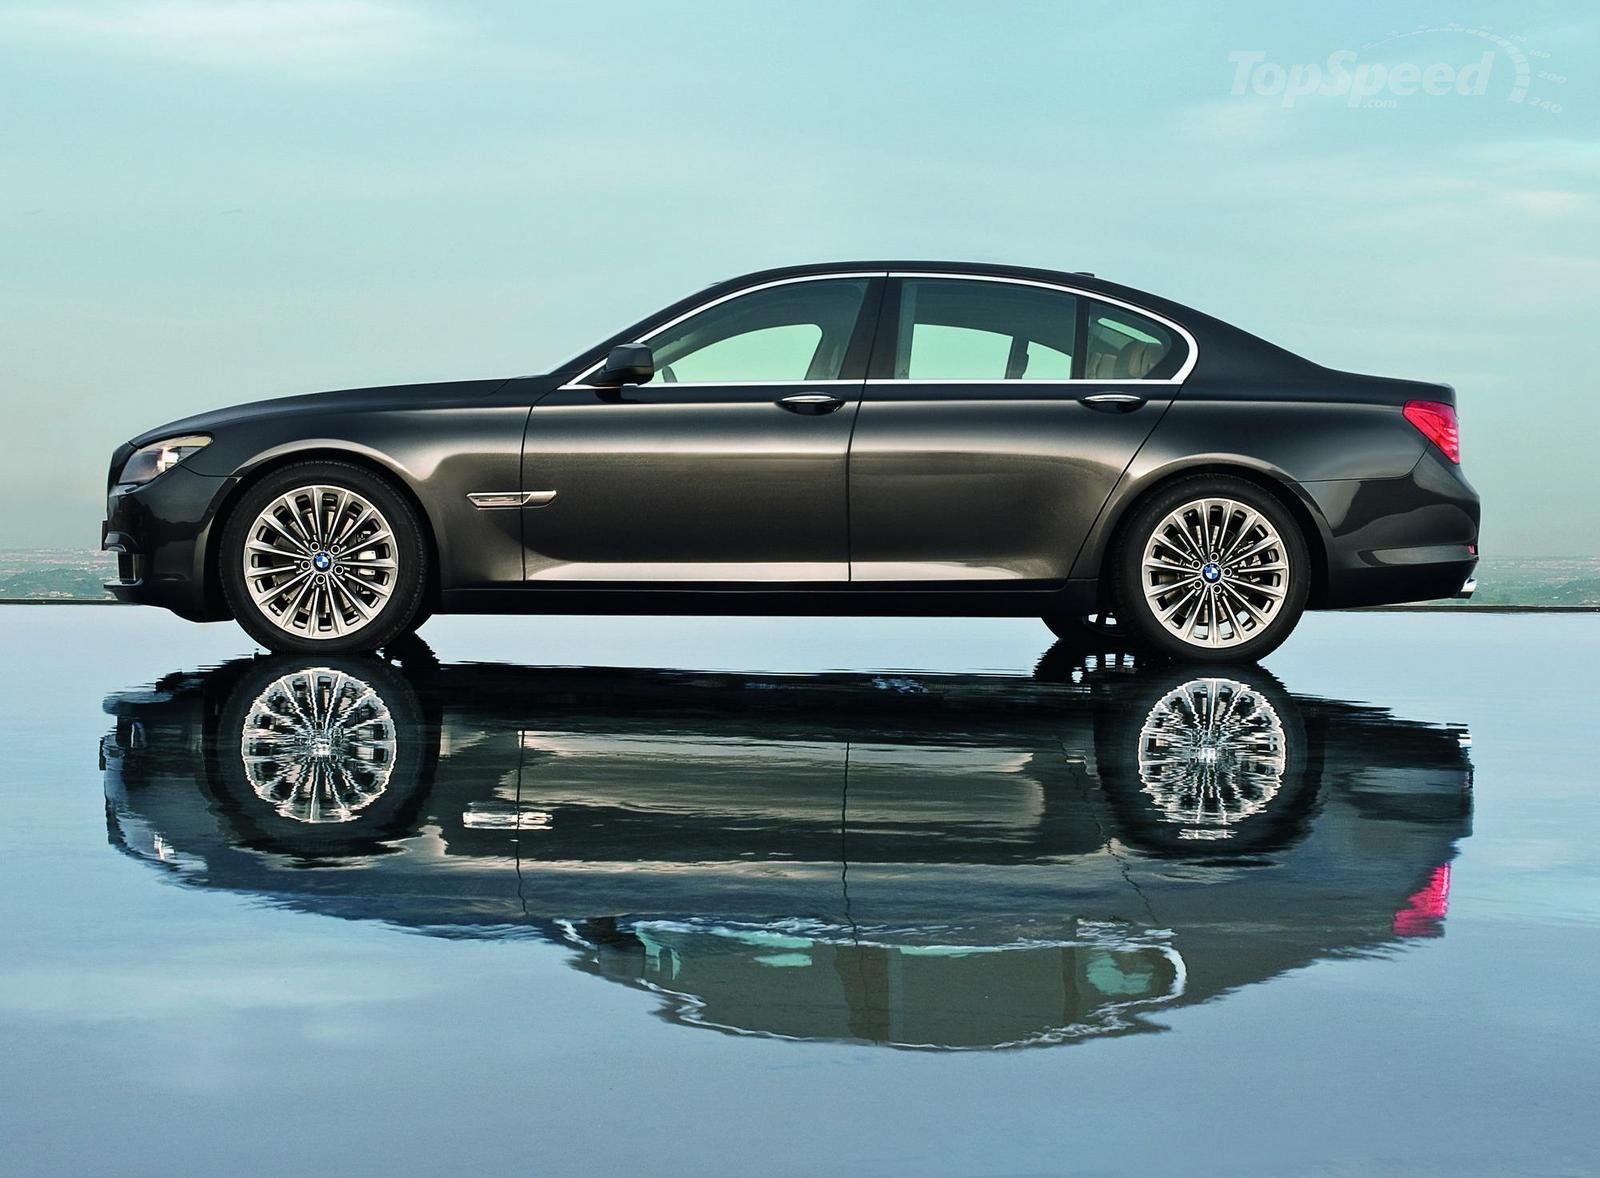 New 2013 BMW 740d Model Photo View